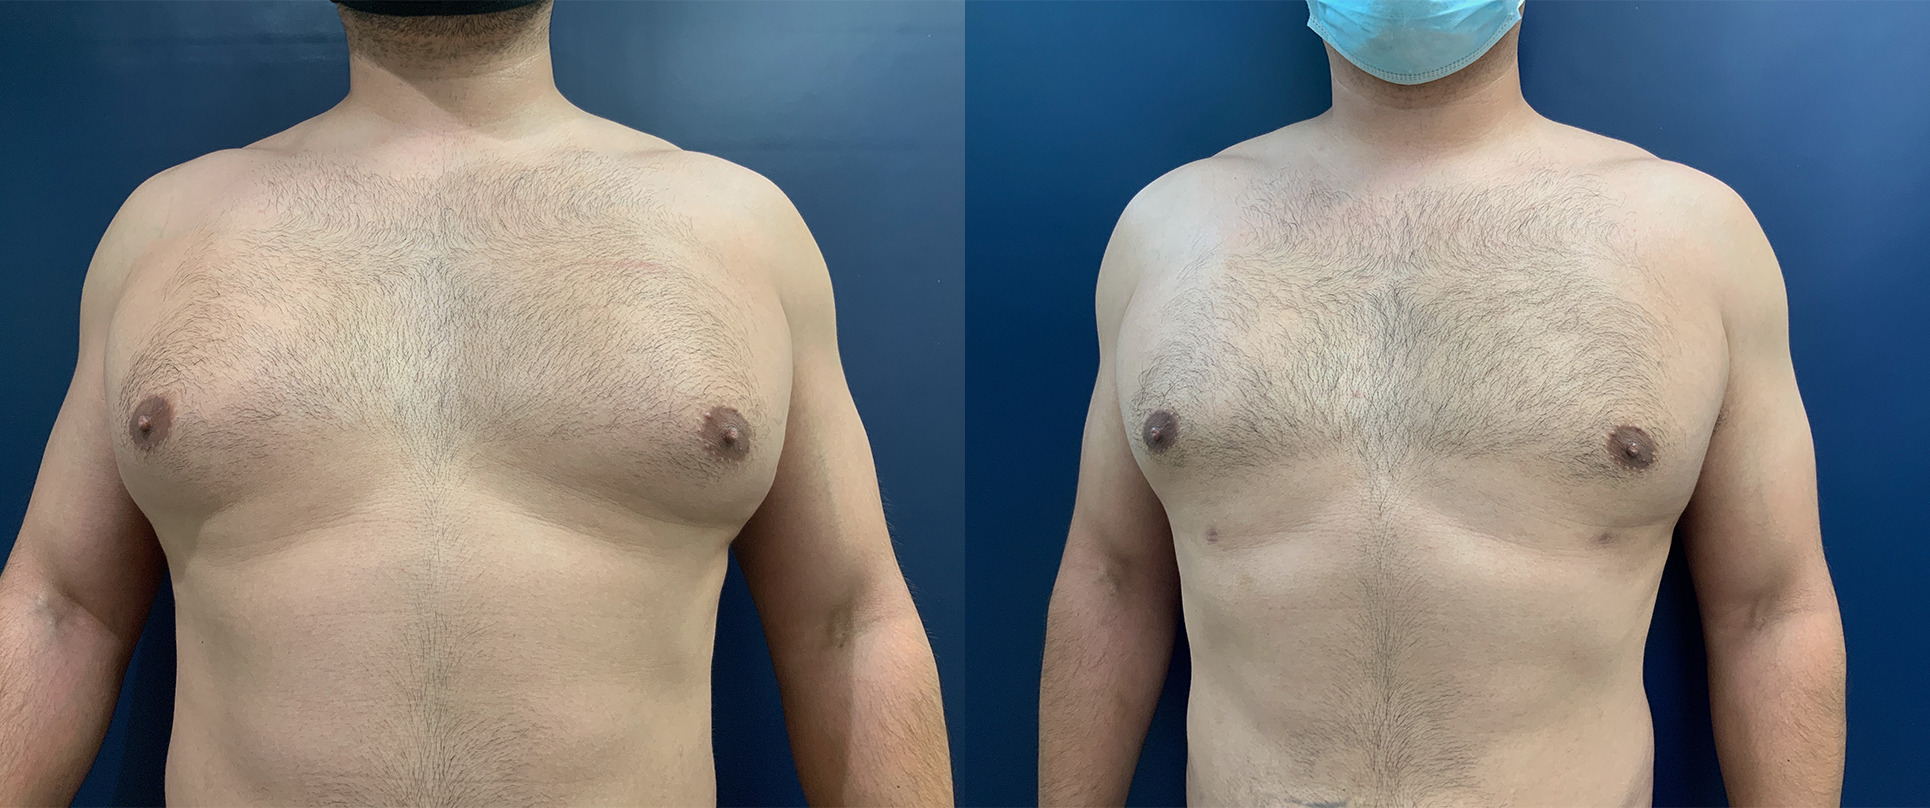 Gynecomastia Before and After Photo by Dr. Patterson in Pensacola Florida